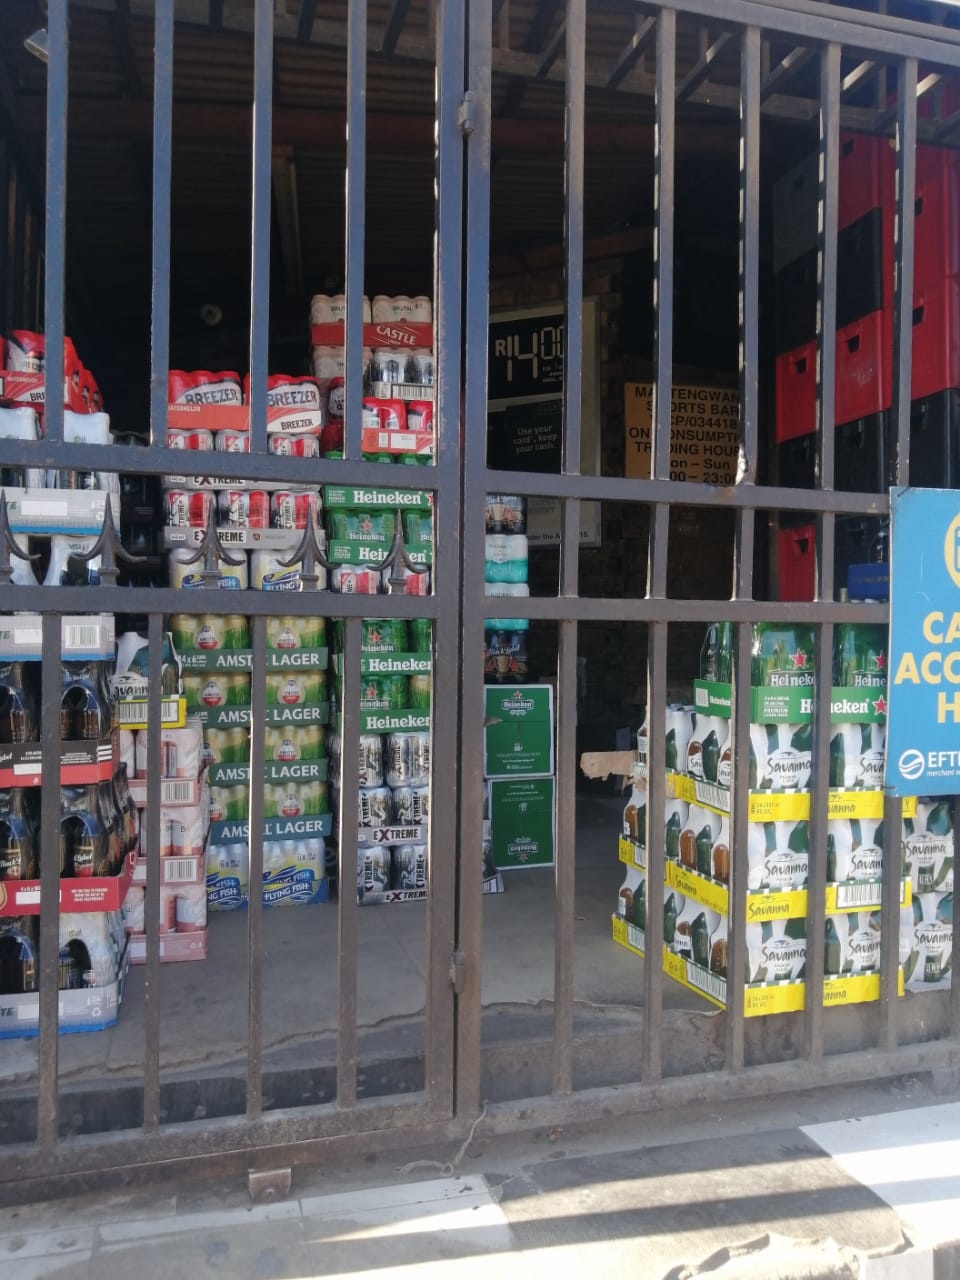 See you in quart: Cape Town metro cops arrest 5 for lockdown liquor sales, confiscate booze worth R500K